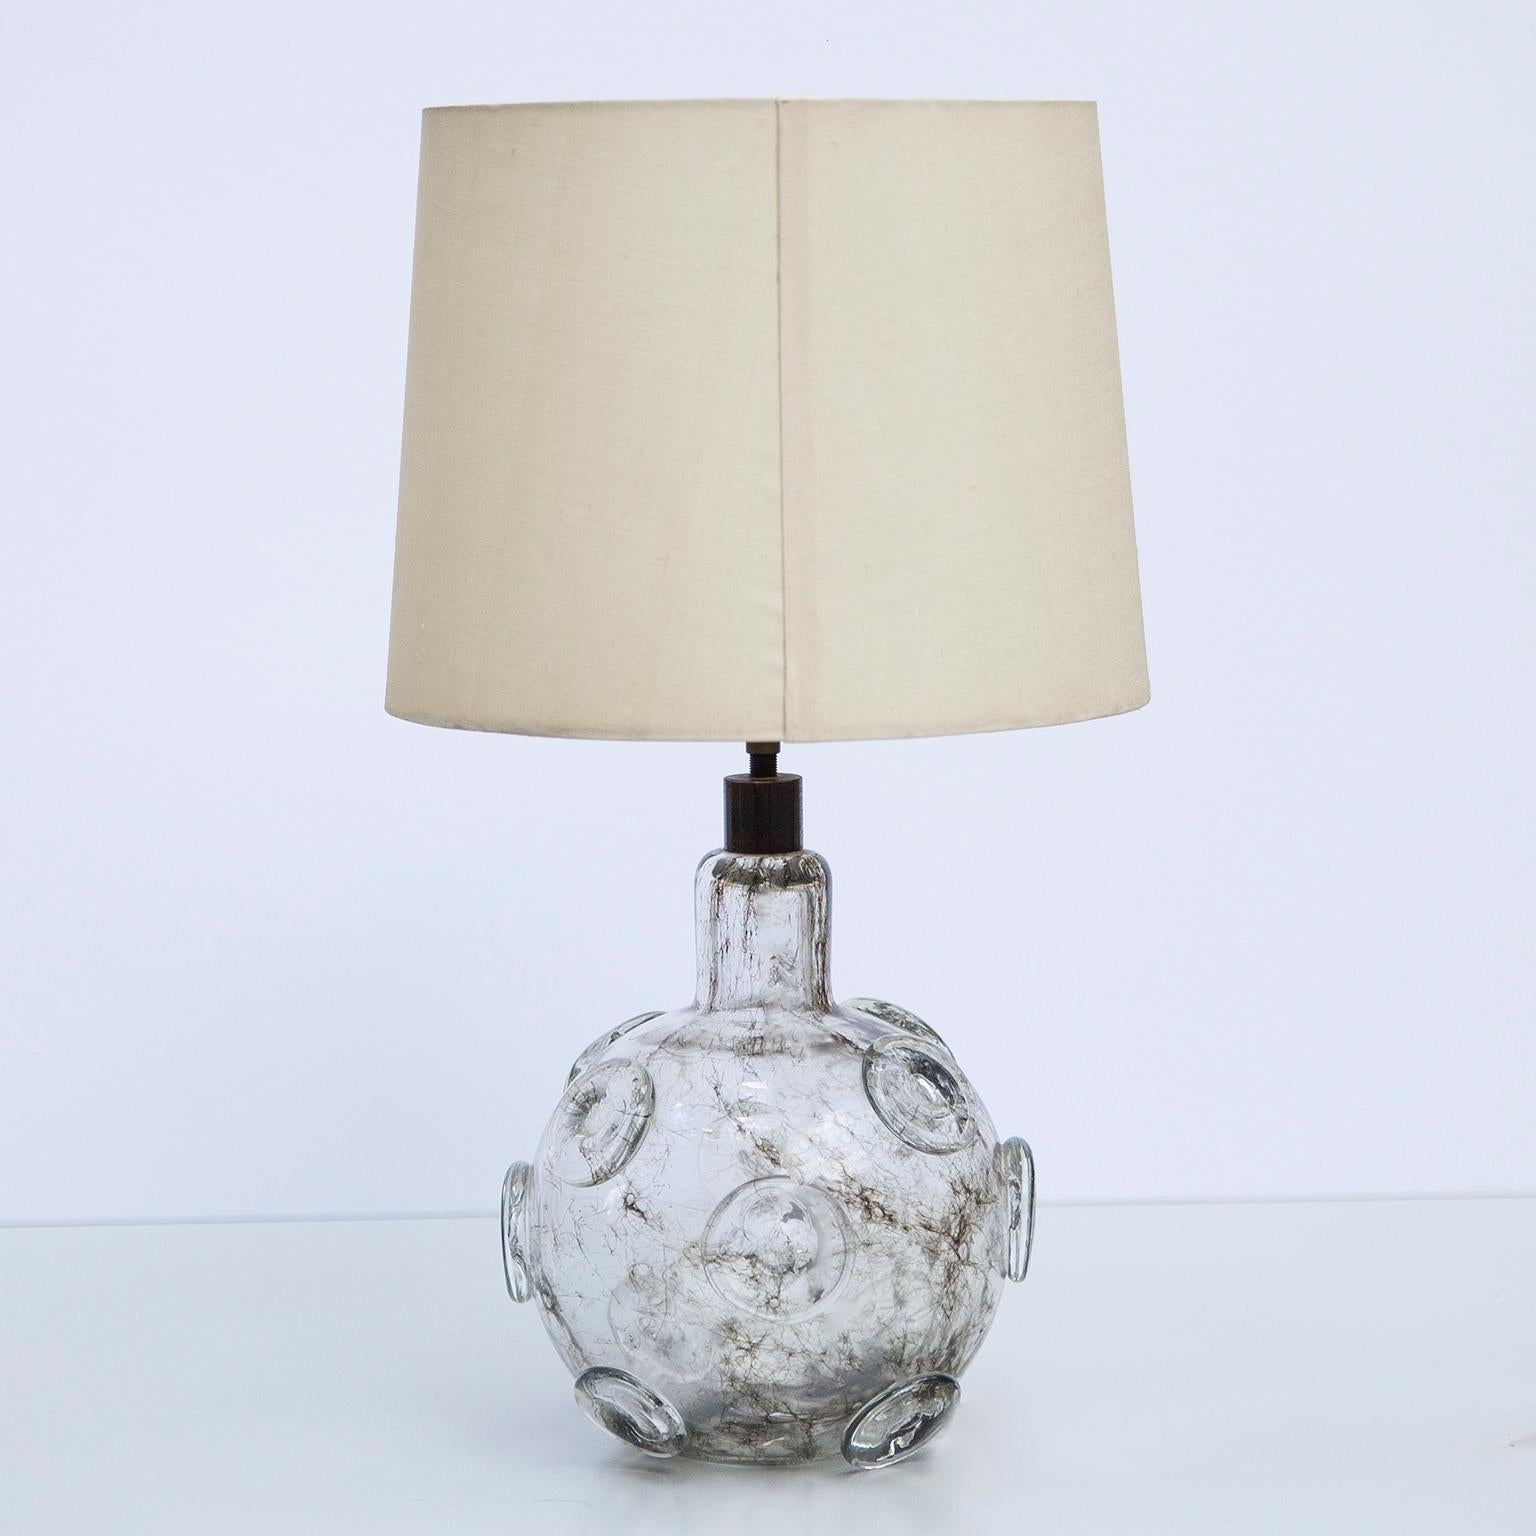 Small table lamp with massive glass and brown color obtained with ashes of steel wool. Applied clear glass medallions with original linen shade. Designed by Ercole Barovier, Italy, 1930s

Literature: Helmut Ricke, Eva Schmitt (Hrsg.),